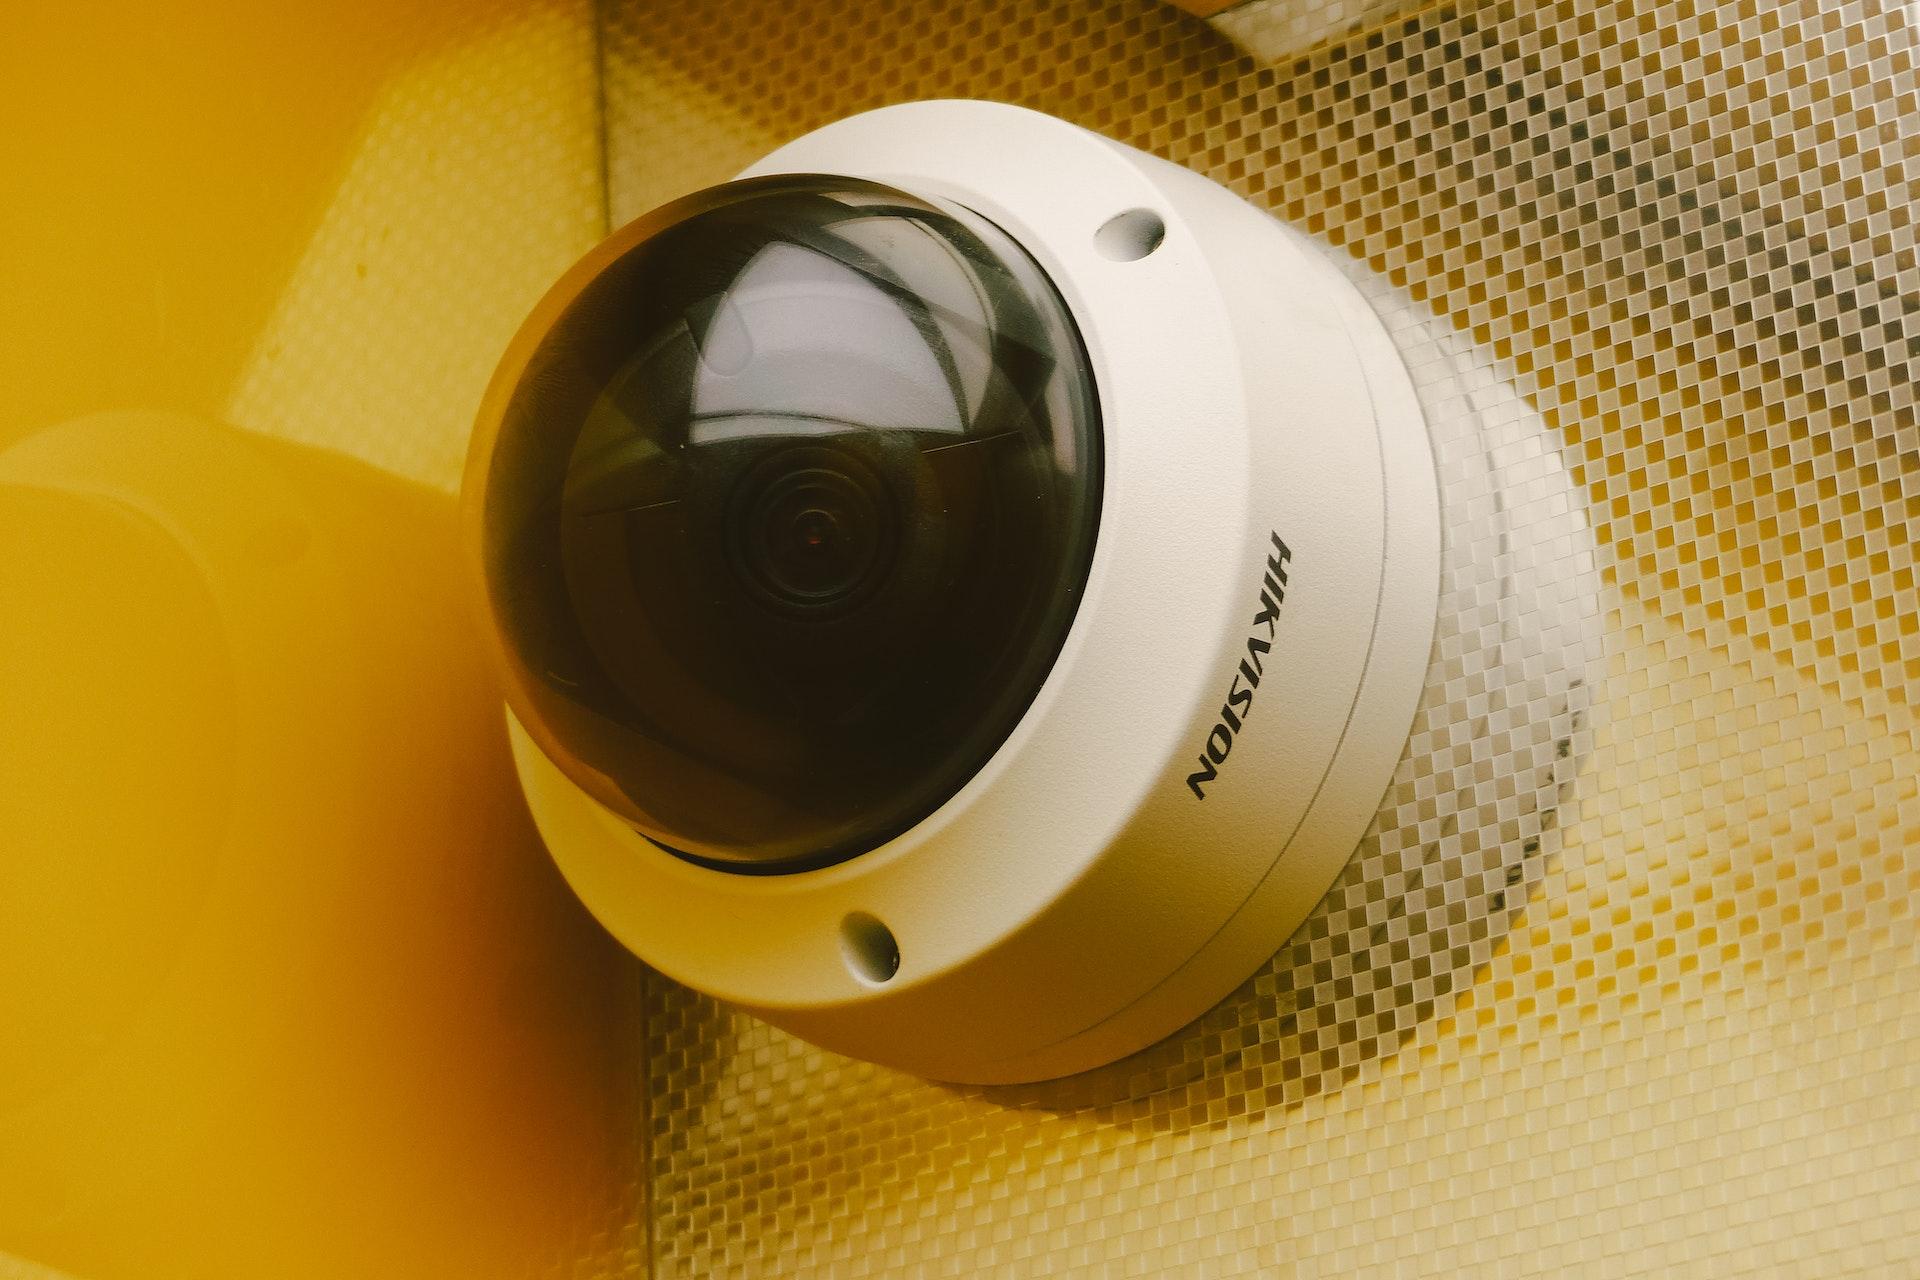 A commercial dome-style CCTV camera installed on a wall